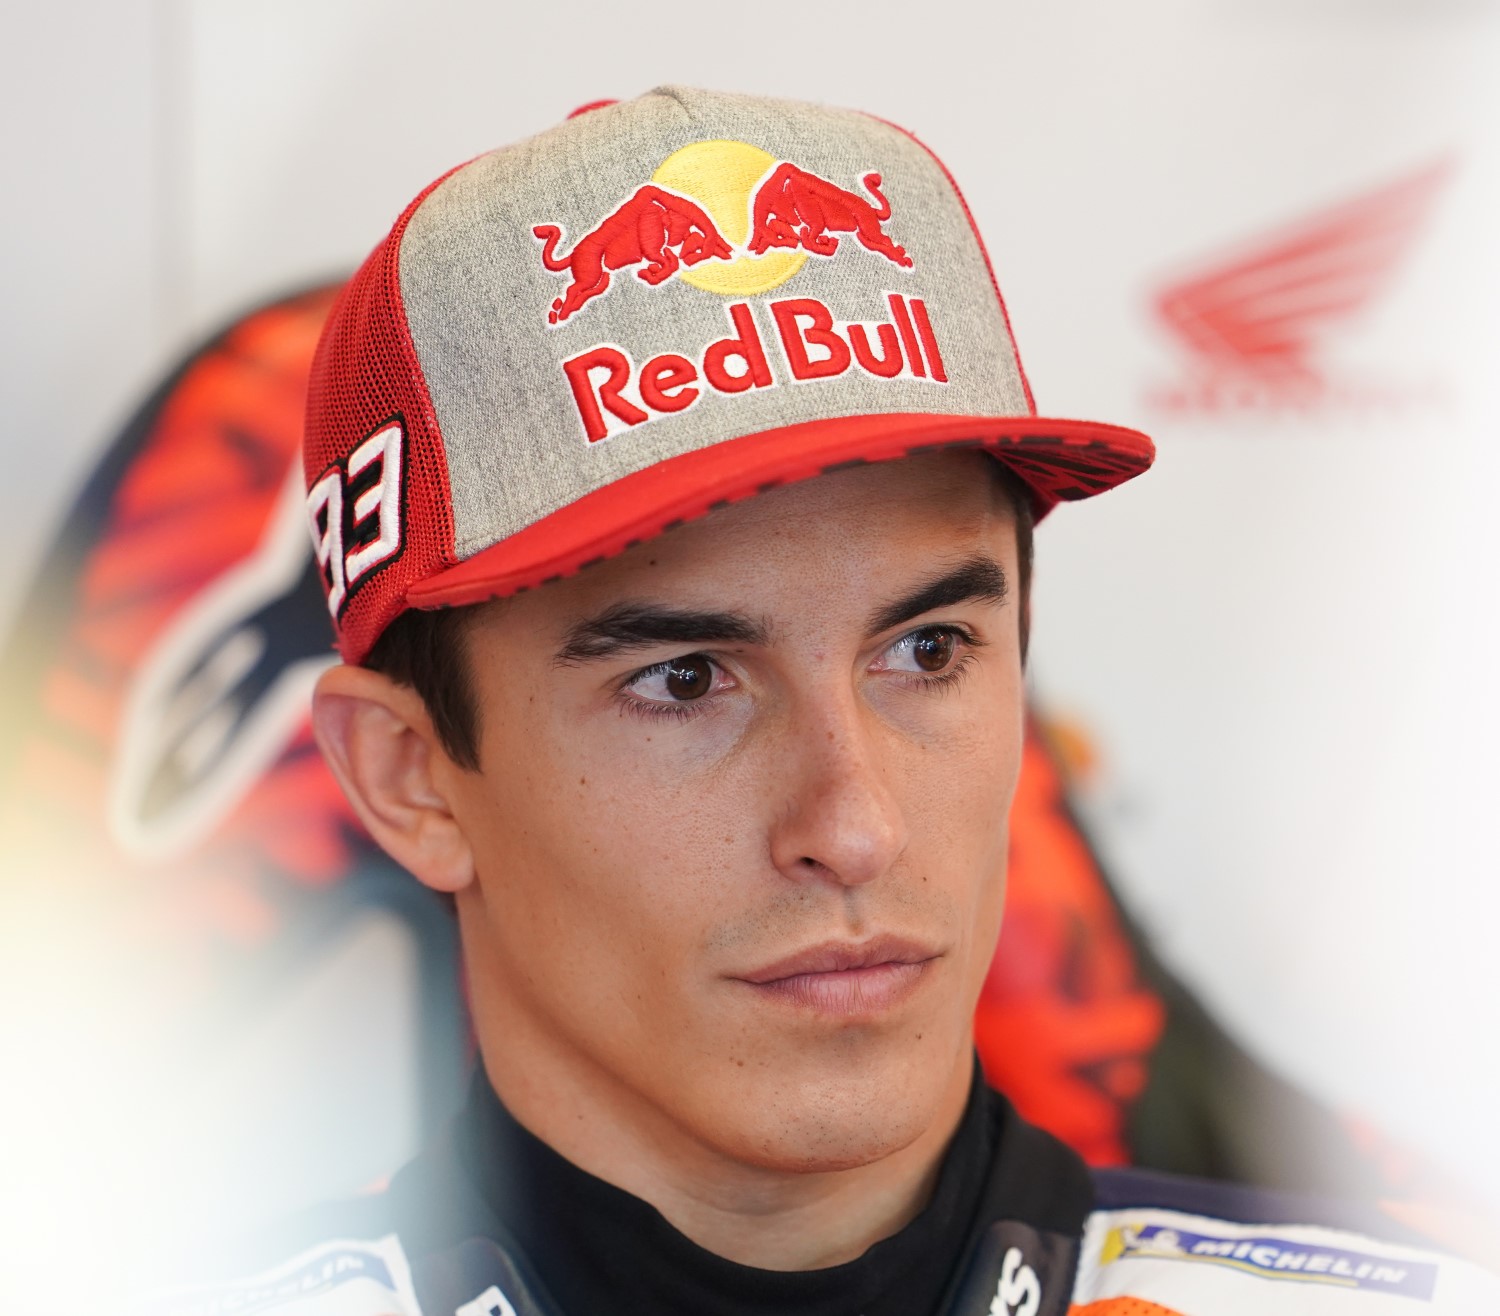 Marquez is focussed on finally beating Ducati at the Red Bull Ring